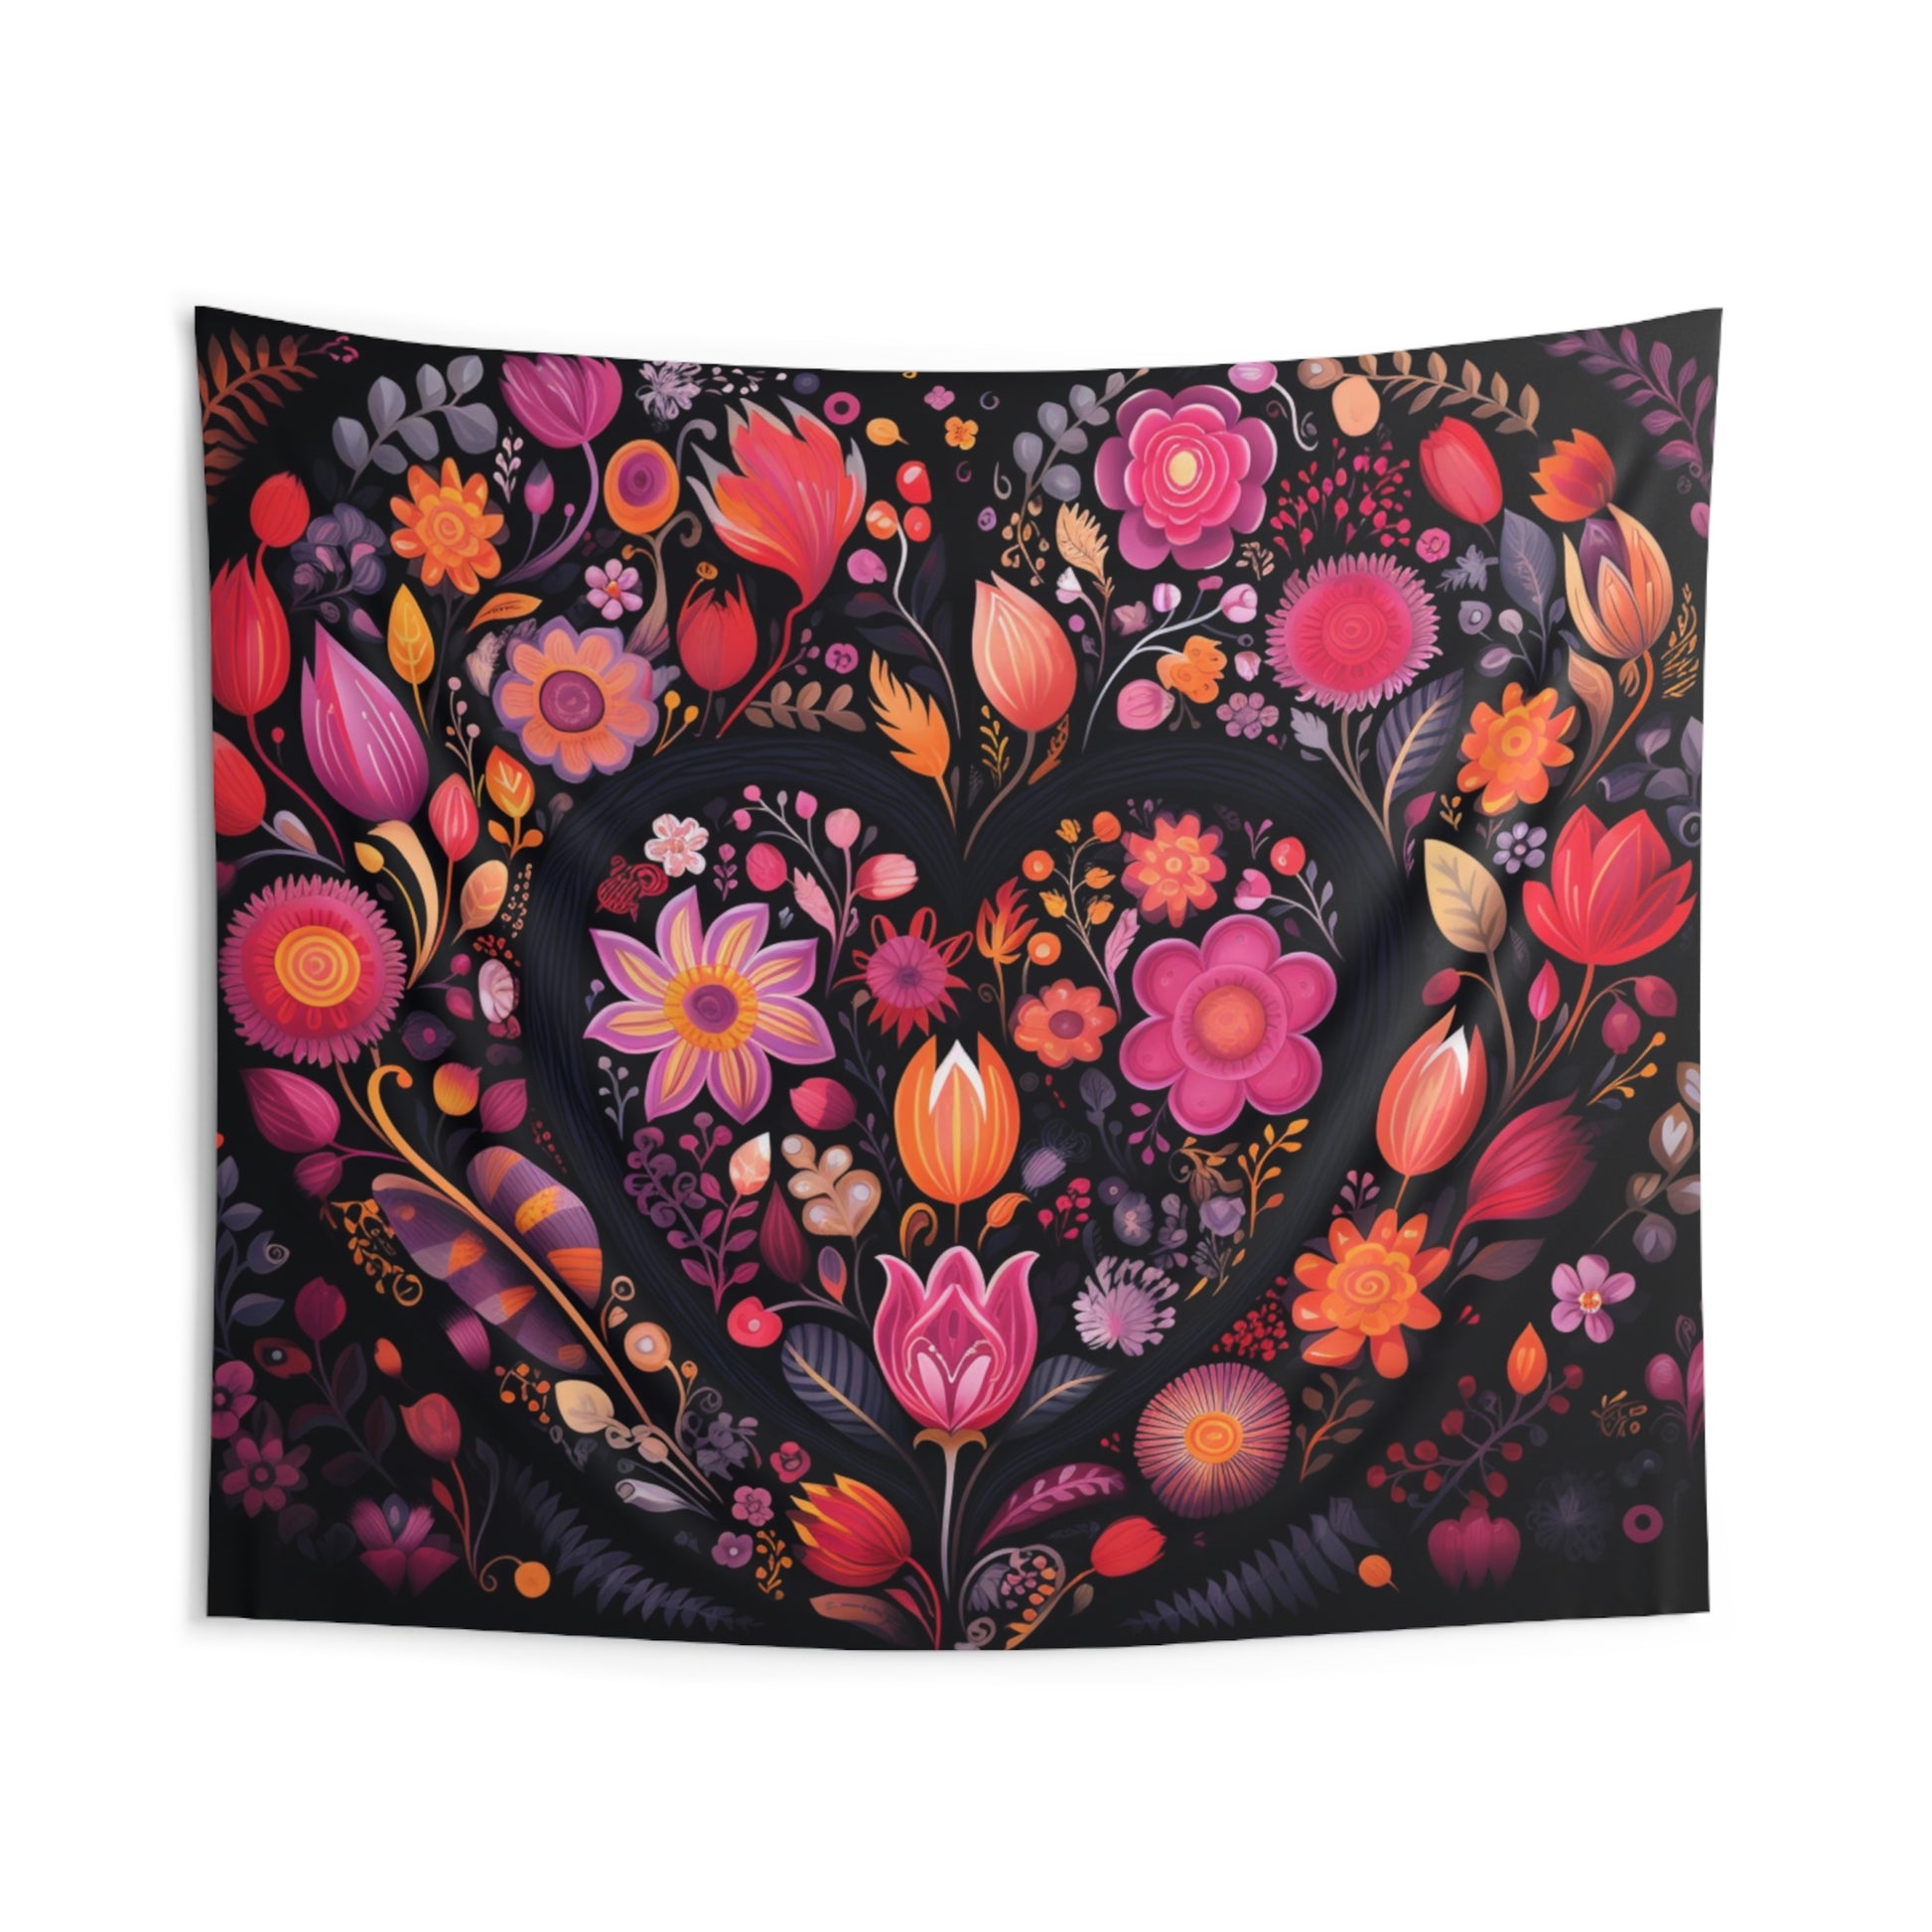 Floral Heart Tapestry, Love Flowers Pink Wall Art Hanging Cool Unique Landscape Aesthetic Large Small Decor Bedroom College Dorm Room Starcove Fashion